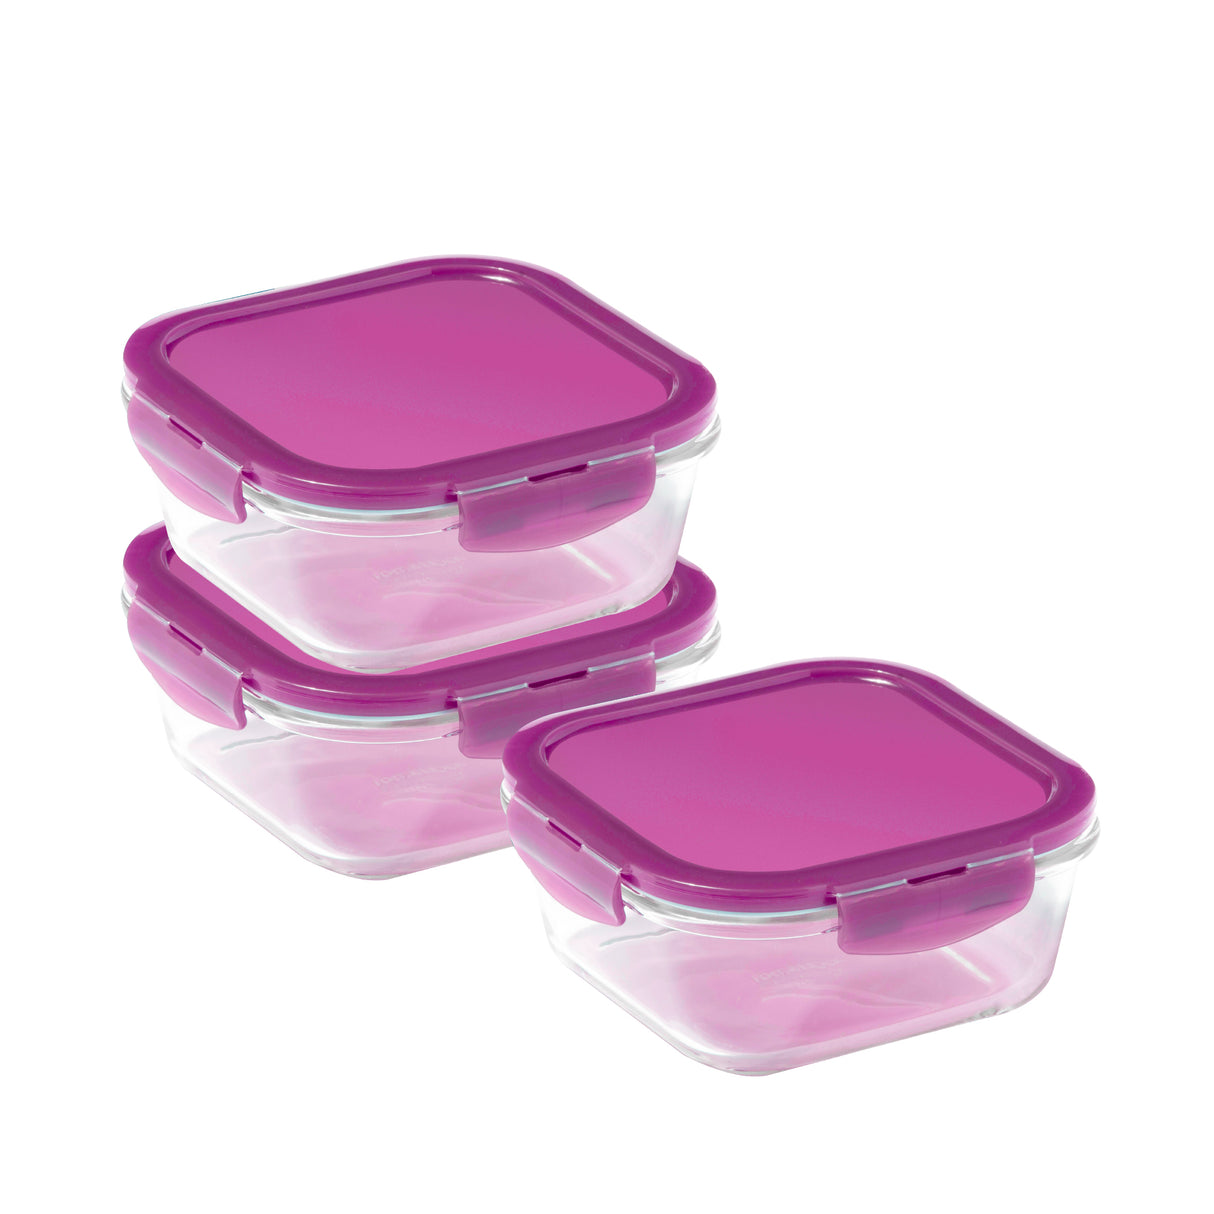 Oven safe meal prep containers with pink lids for storage